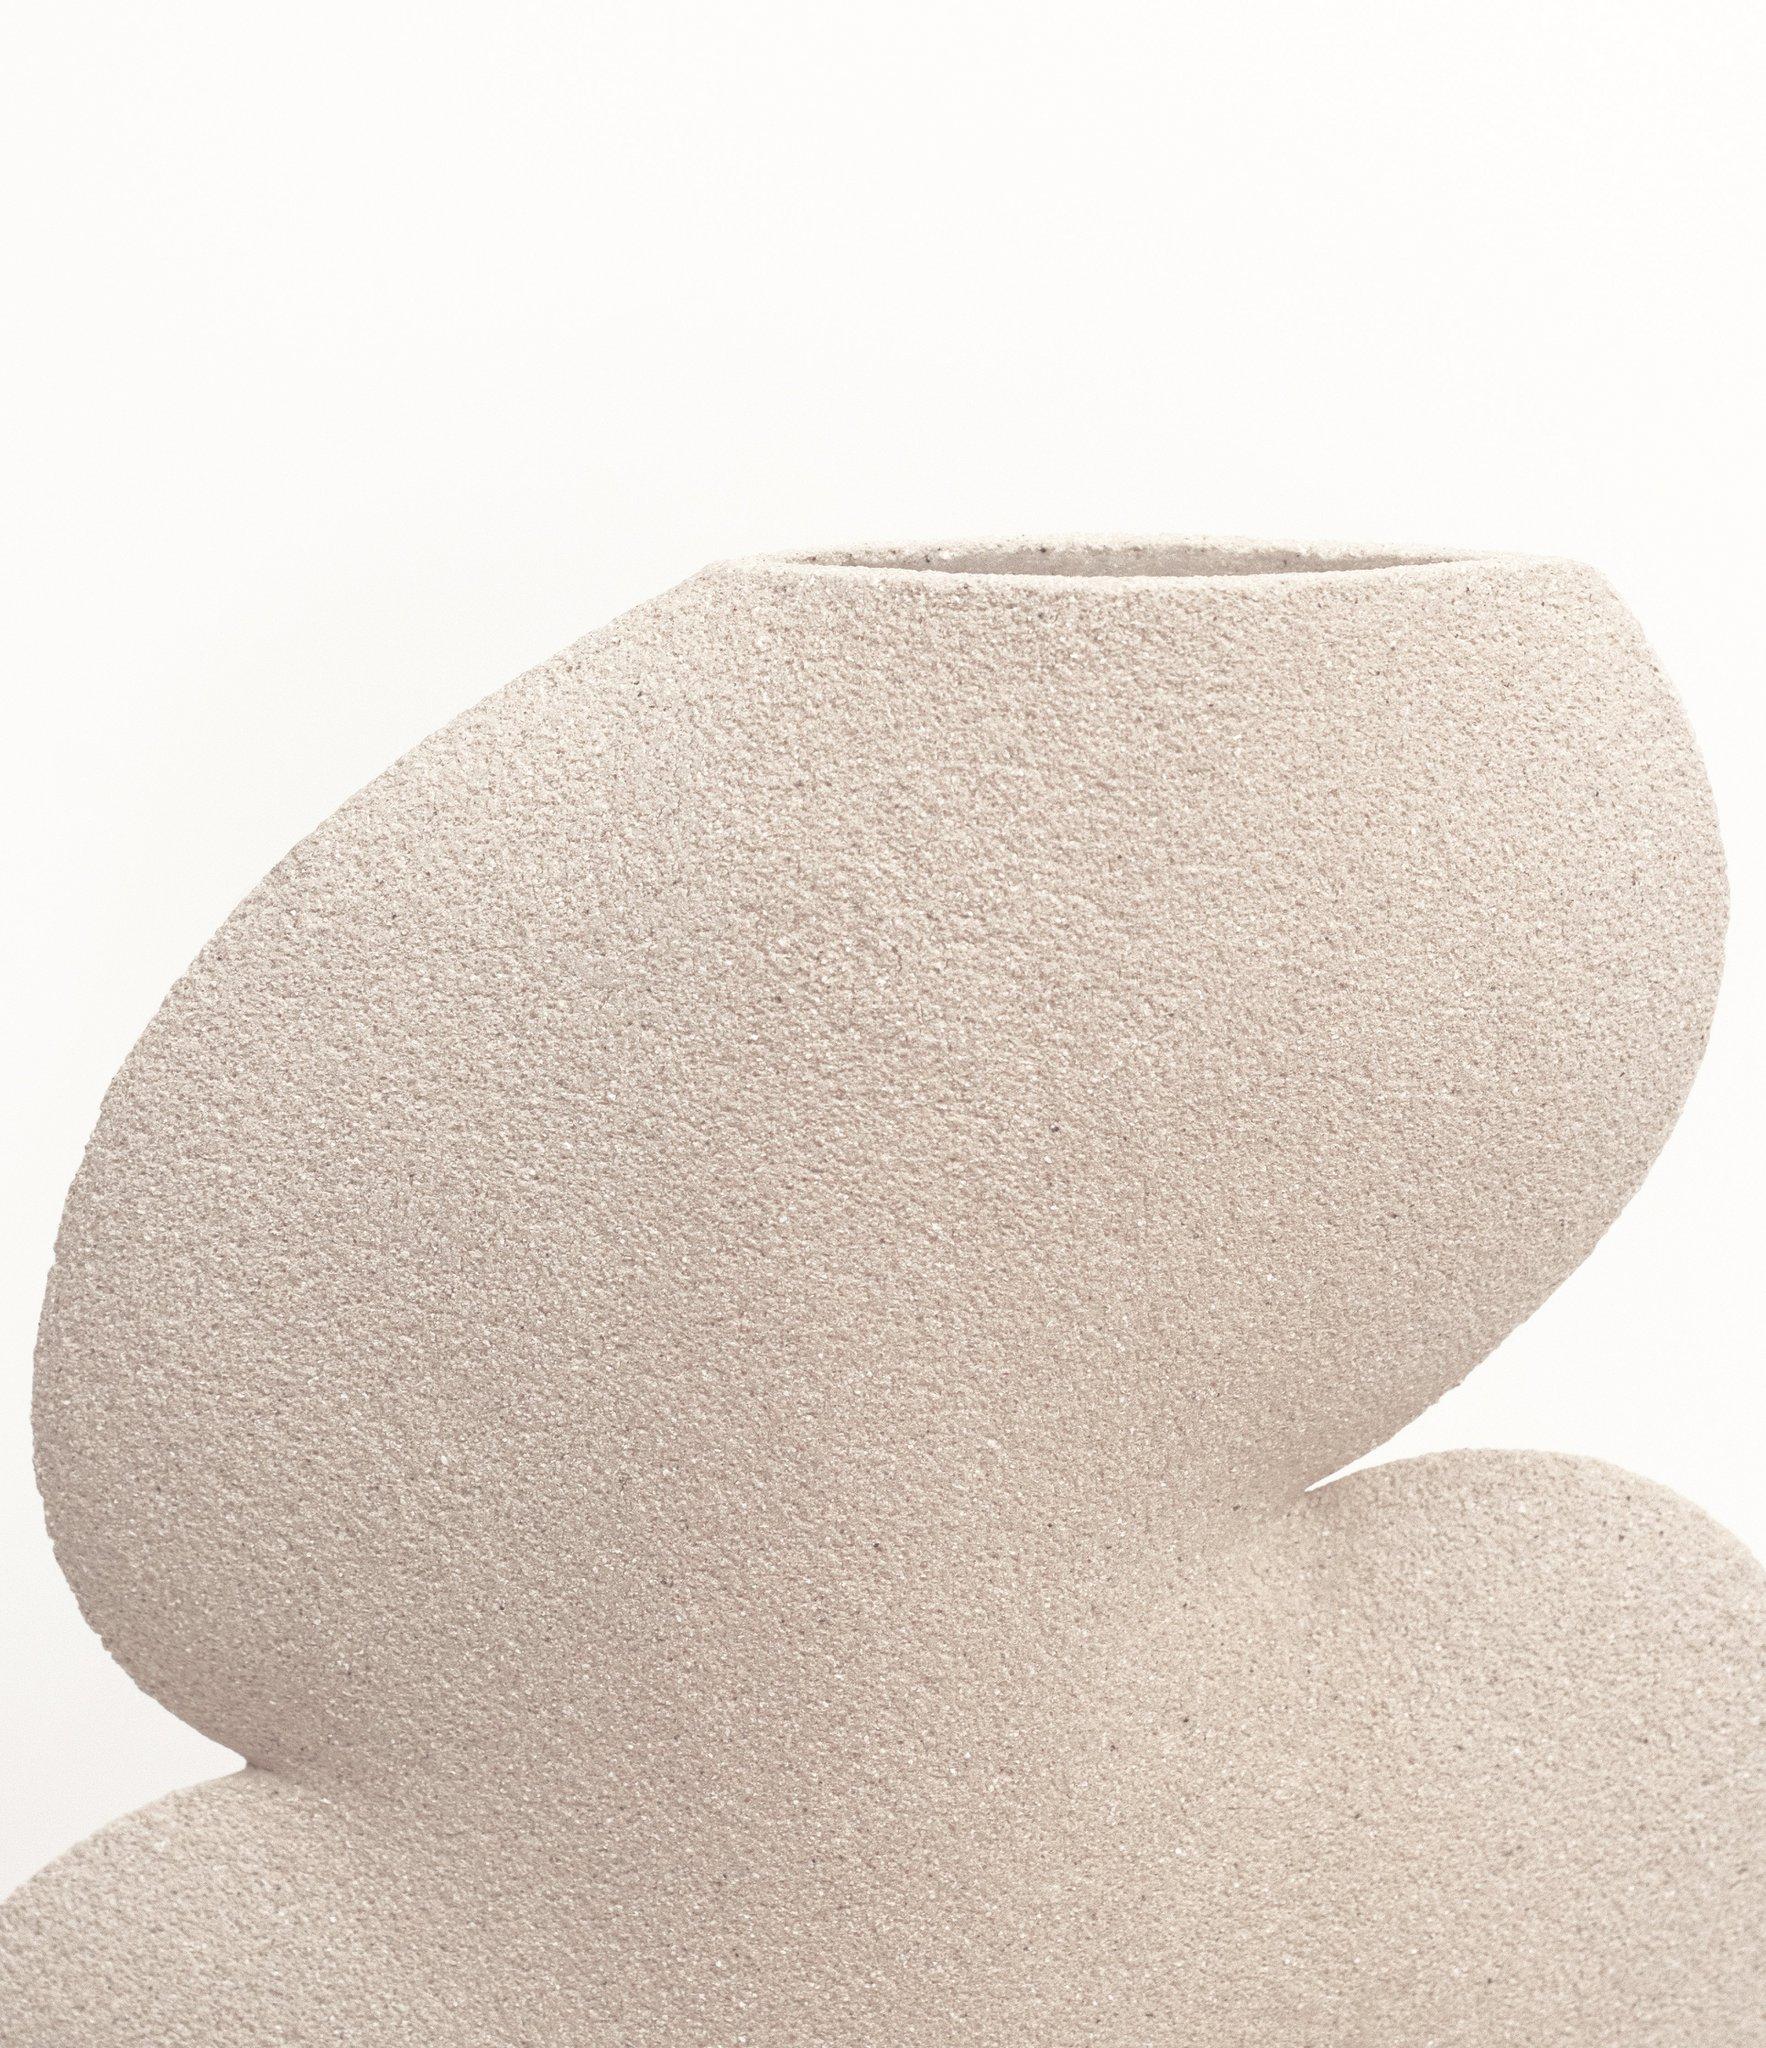 Minimalist 21st Century Ellipse N°1 Vase in White Ceramic, Hand-Crafted in France For Sale